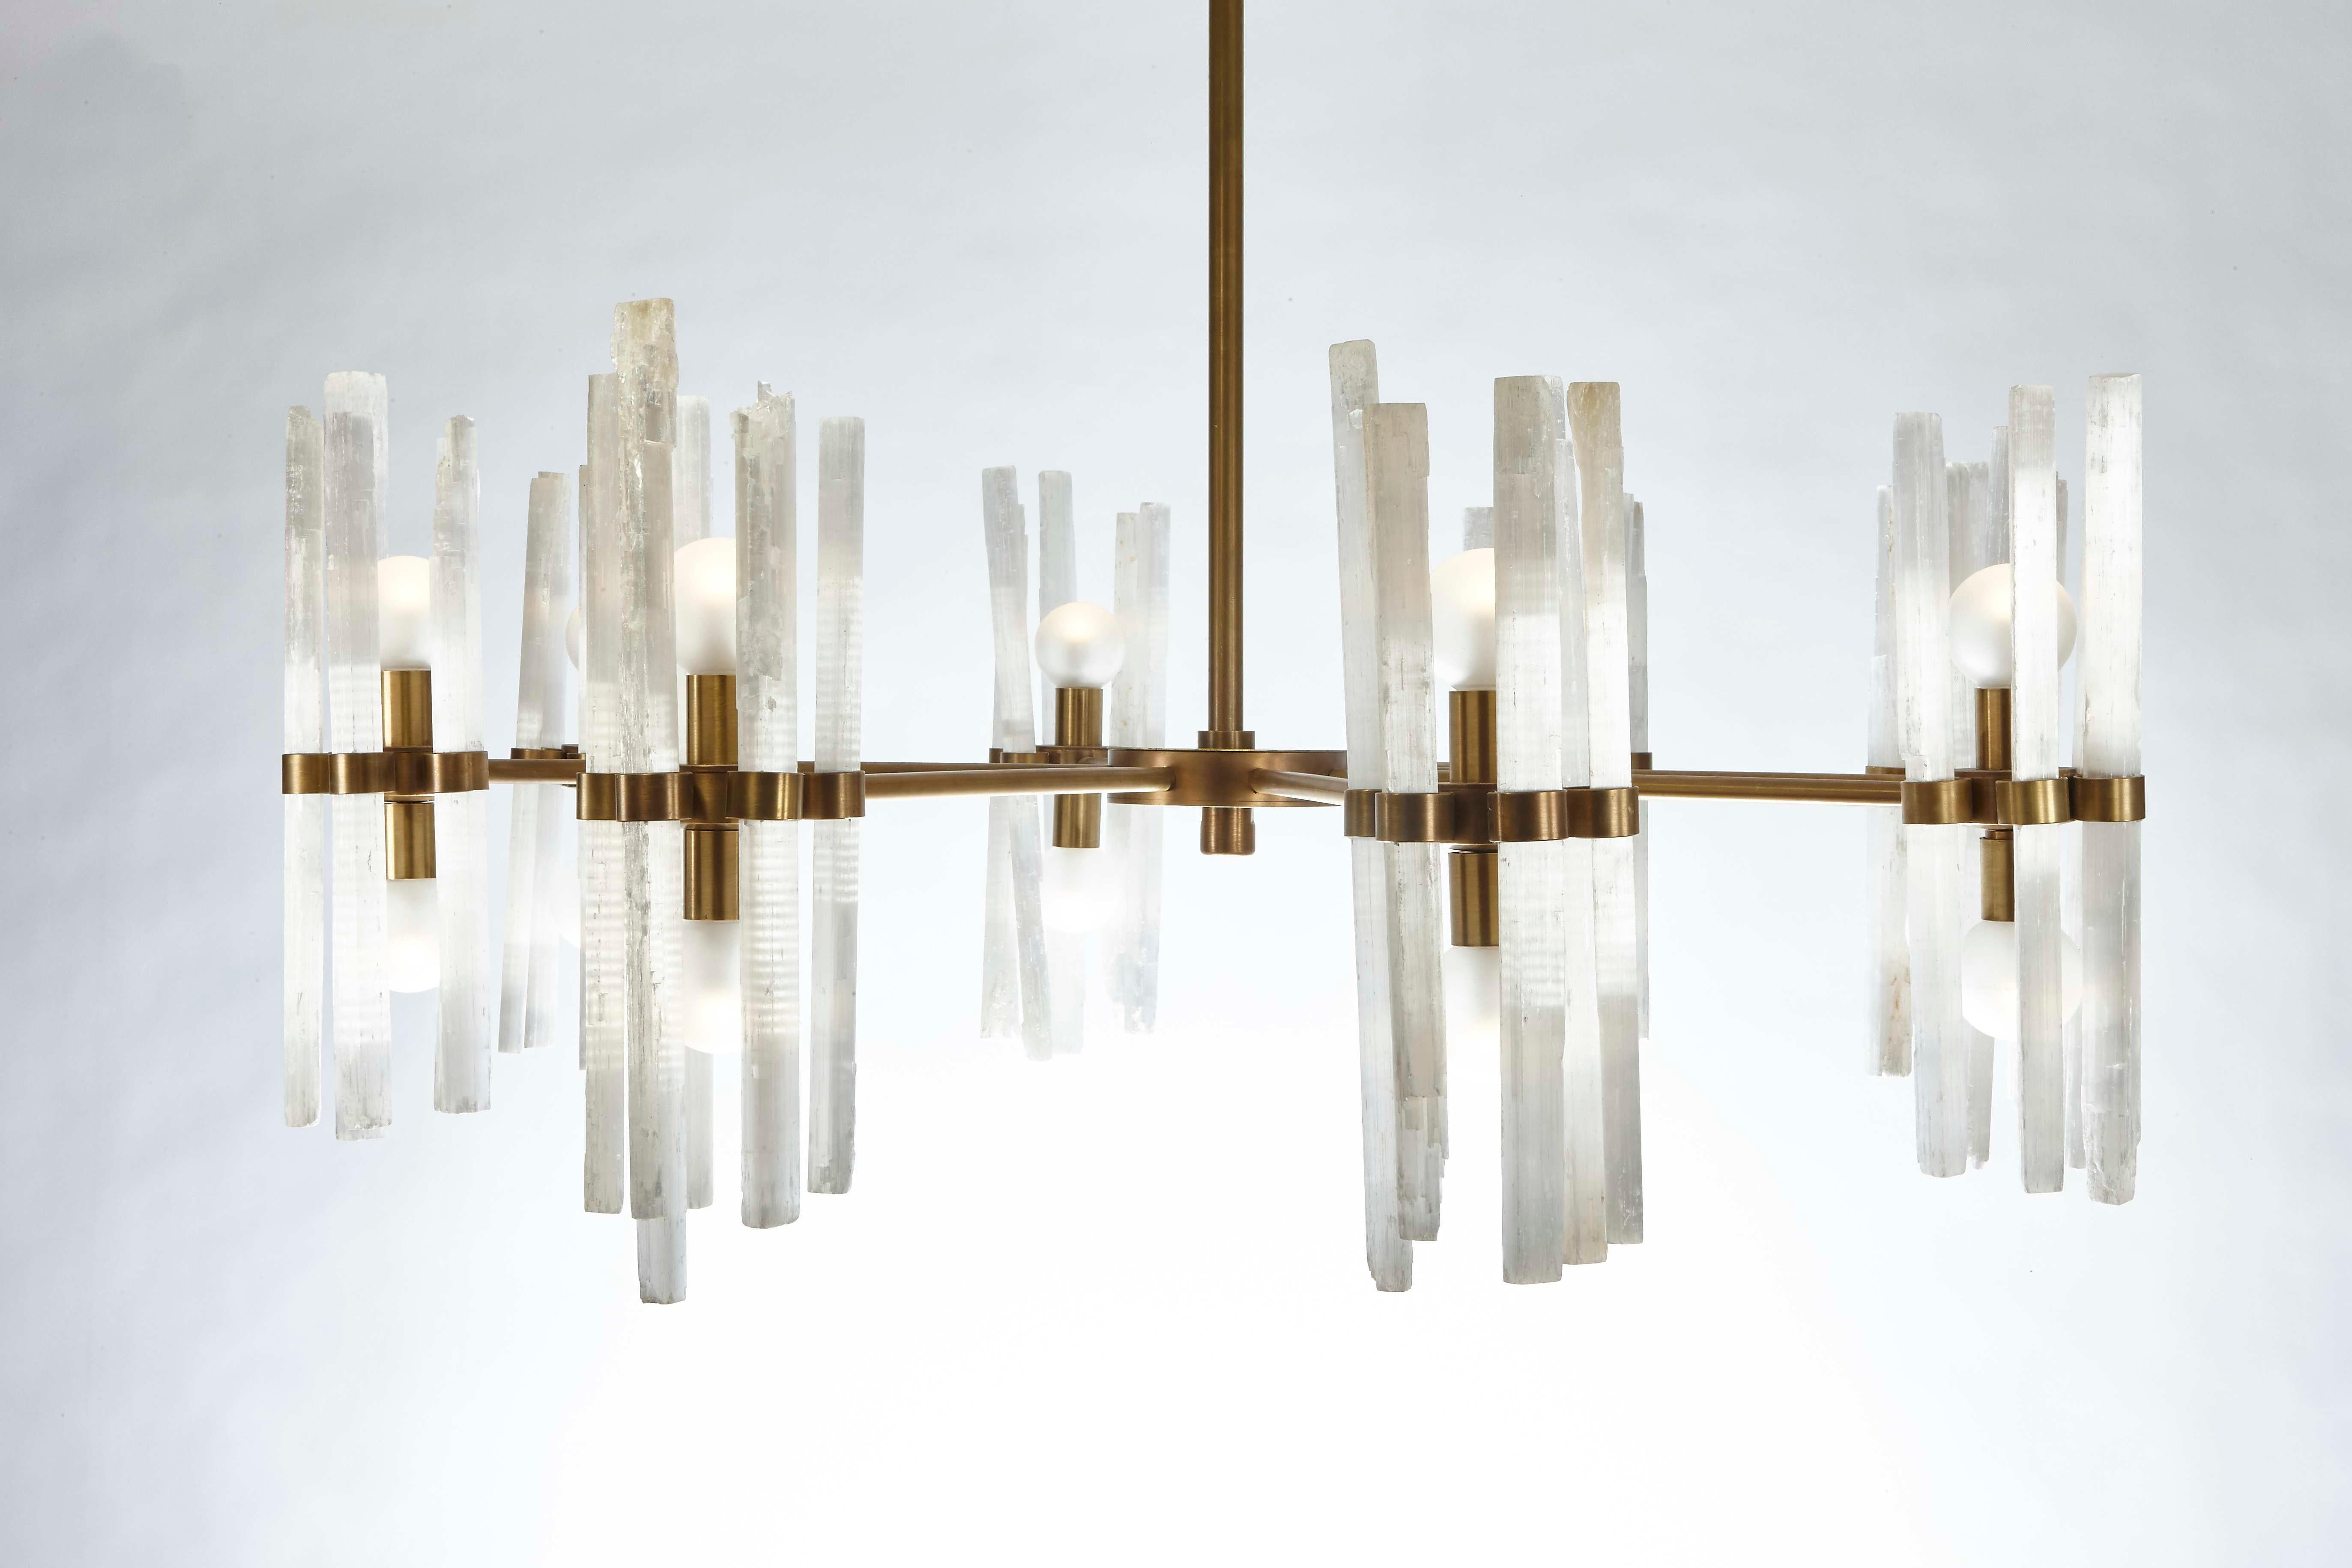 Our rock crystal chandelier is a stunning piece of art that embodies both elegance and natural beauty. The rock crystal rods are more organic and are placed in a more staggered display compared to our Flute chandelier. Handcrafted by skilled British